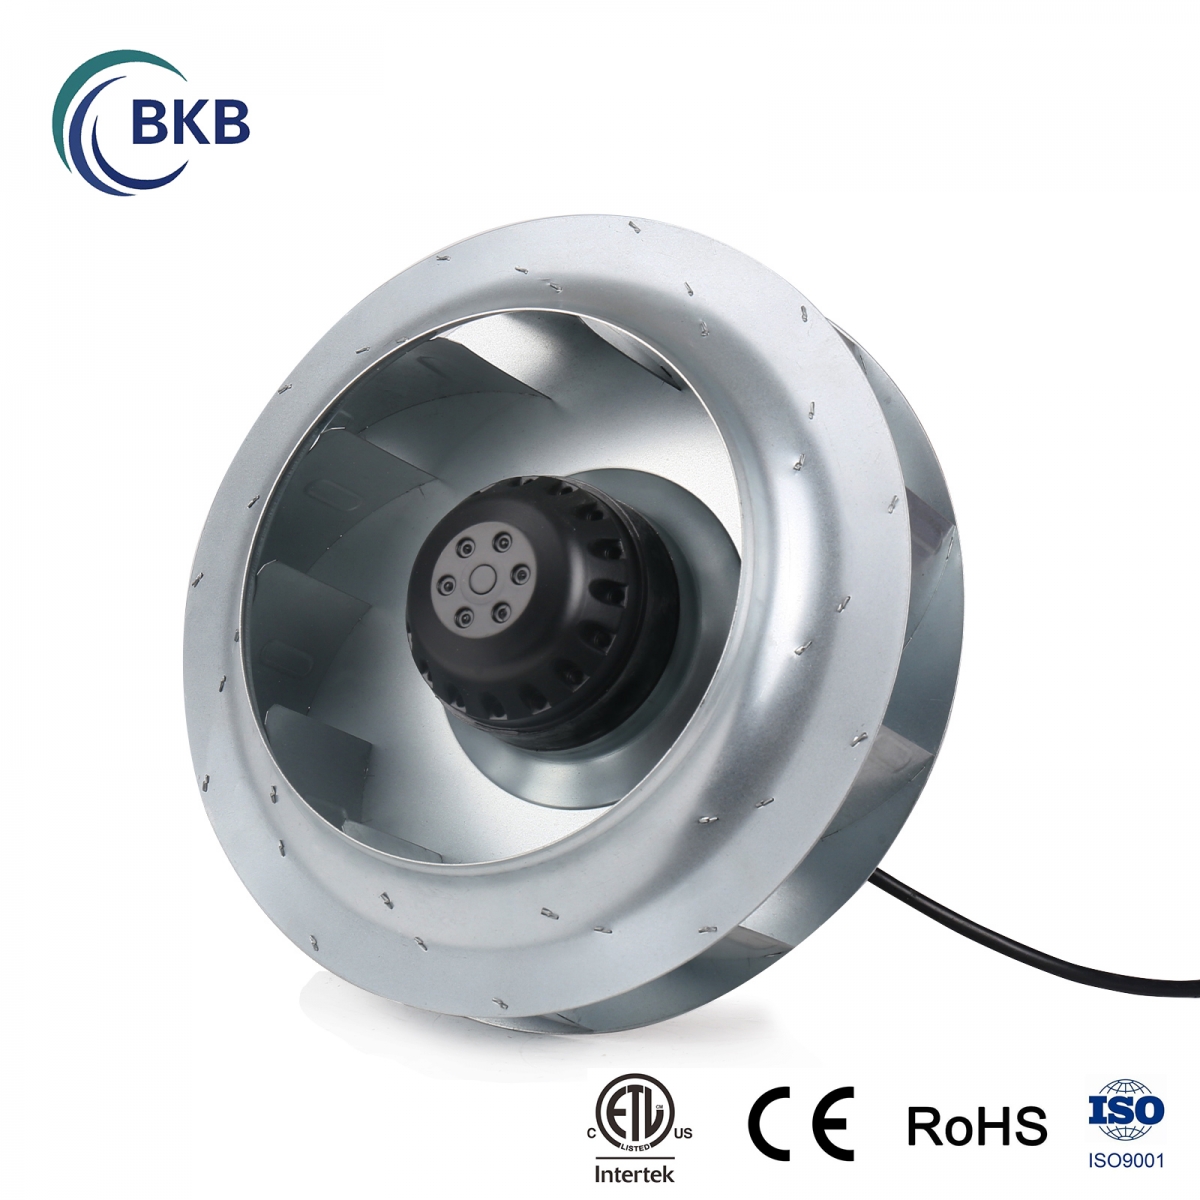 The centrifugal fan is drum shaped and consists of a plurality of fan blades installed around the hub.-SUNLIGHT BLOWER,Centrifugal Fans, Inline Fans,Motors,Backward curved centrifugal fans ,Forward curved centrifugal fans ,inlet fans, EC fans